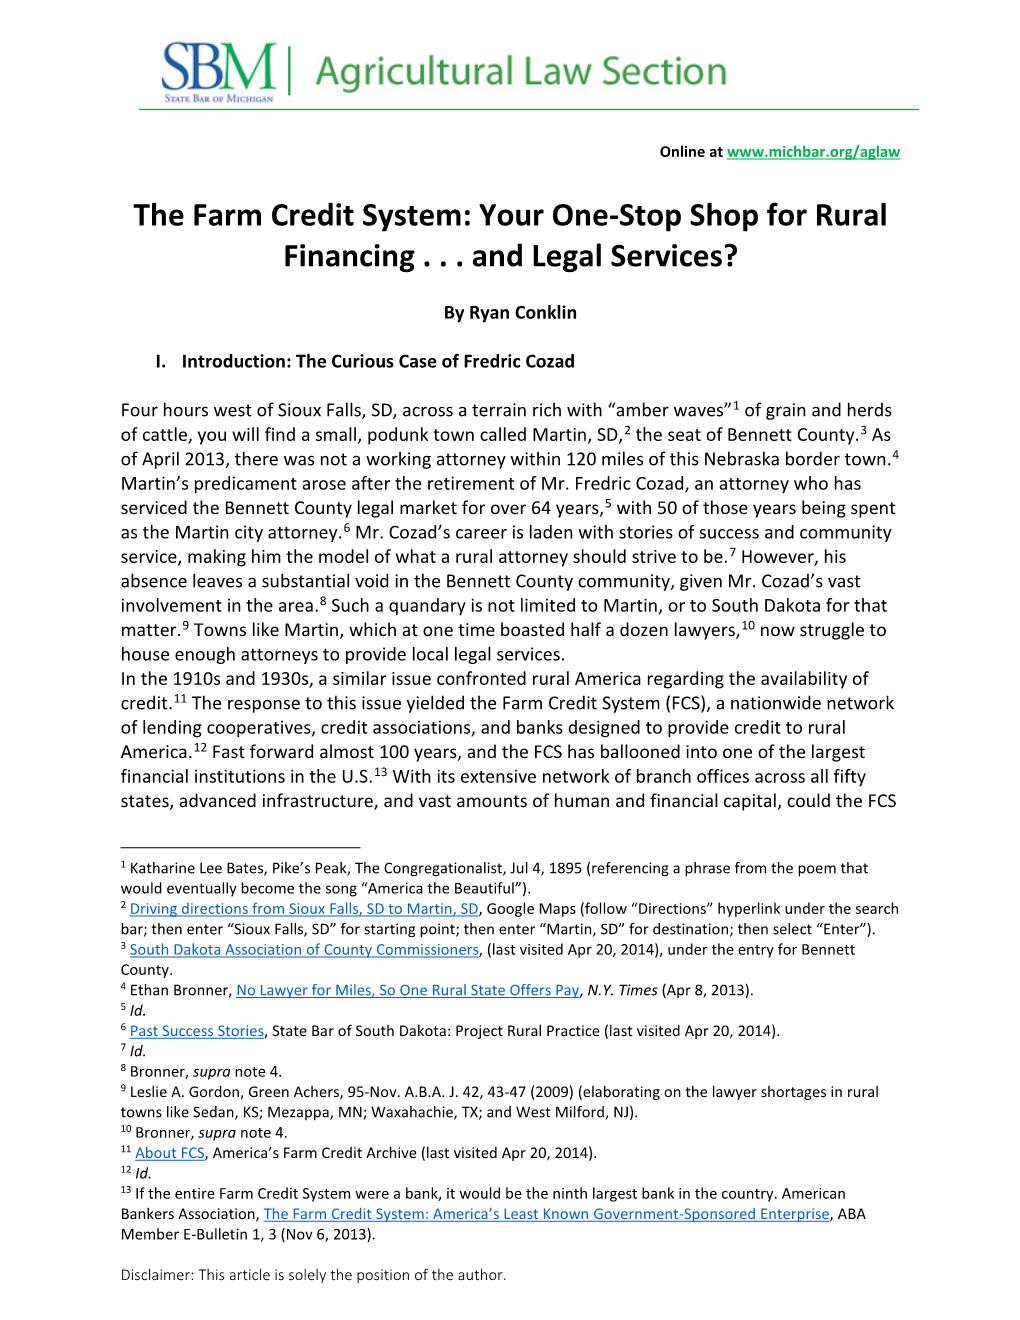 The Farm Credit System: Your One-Stop Shop for Rural Financing